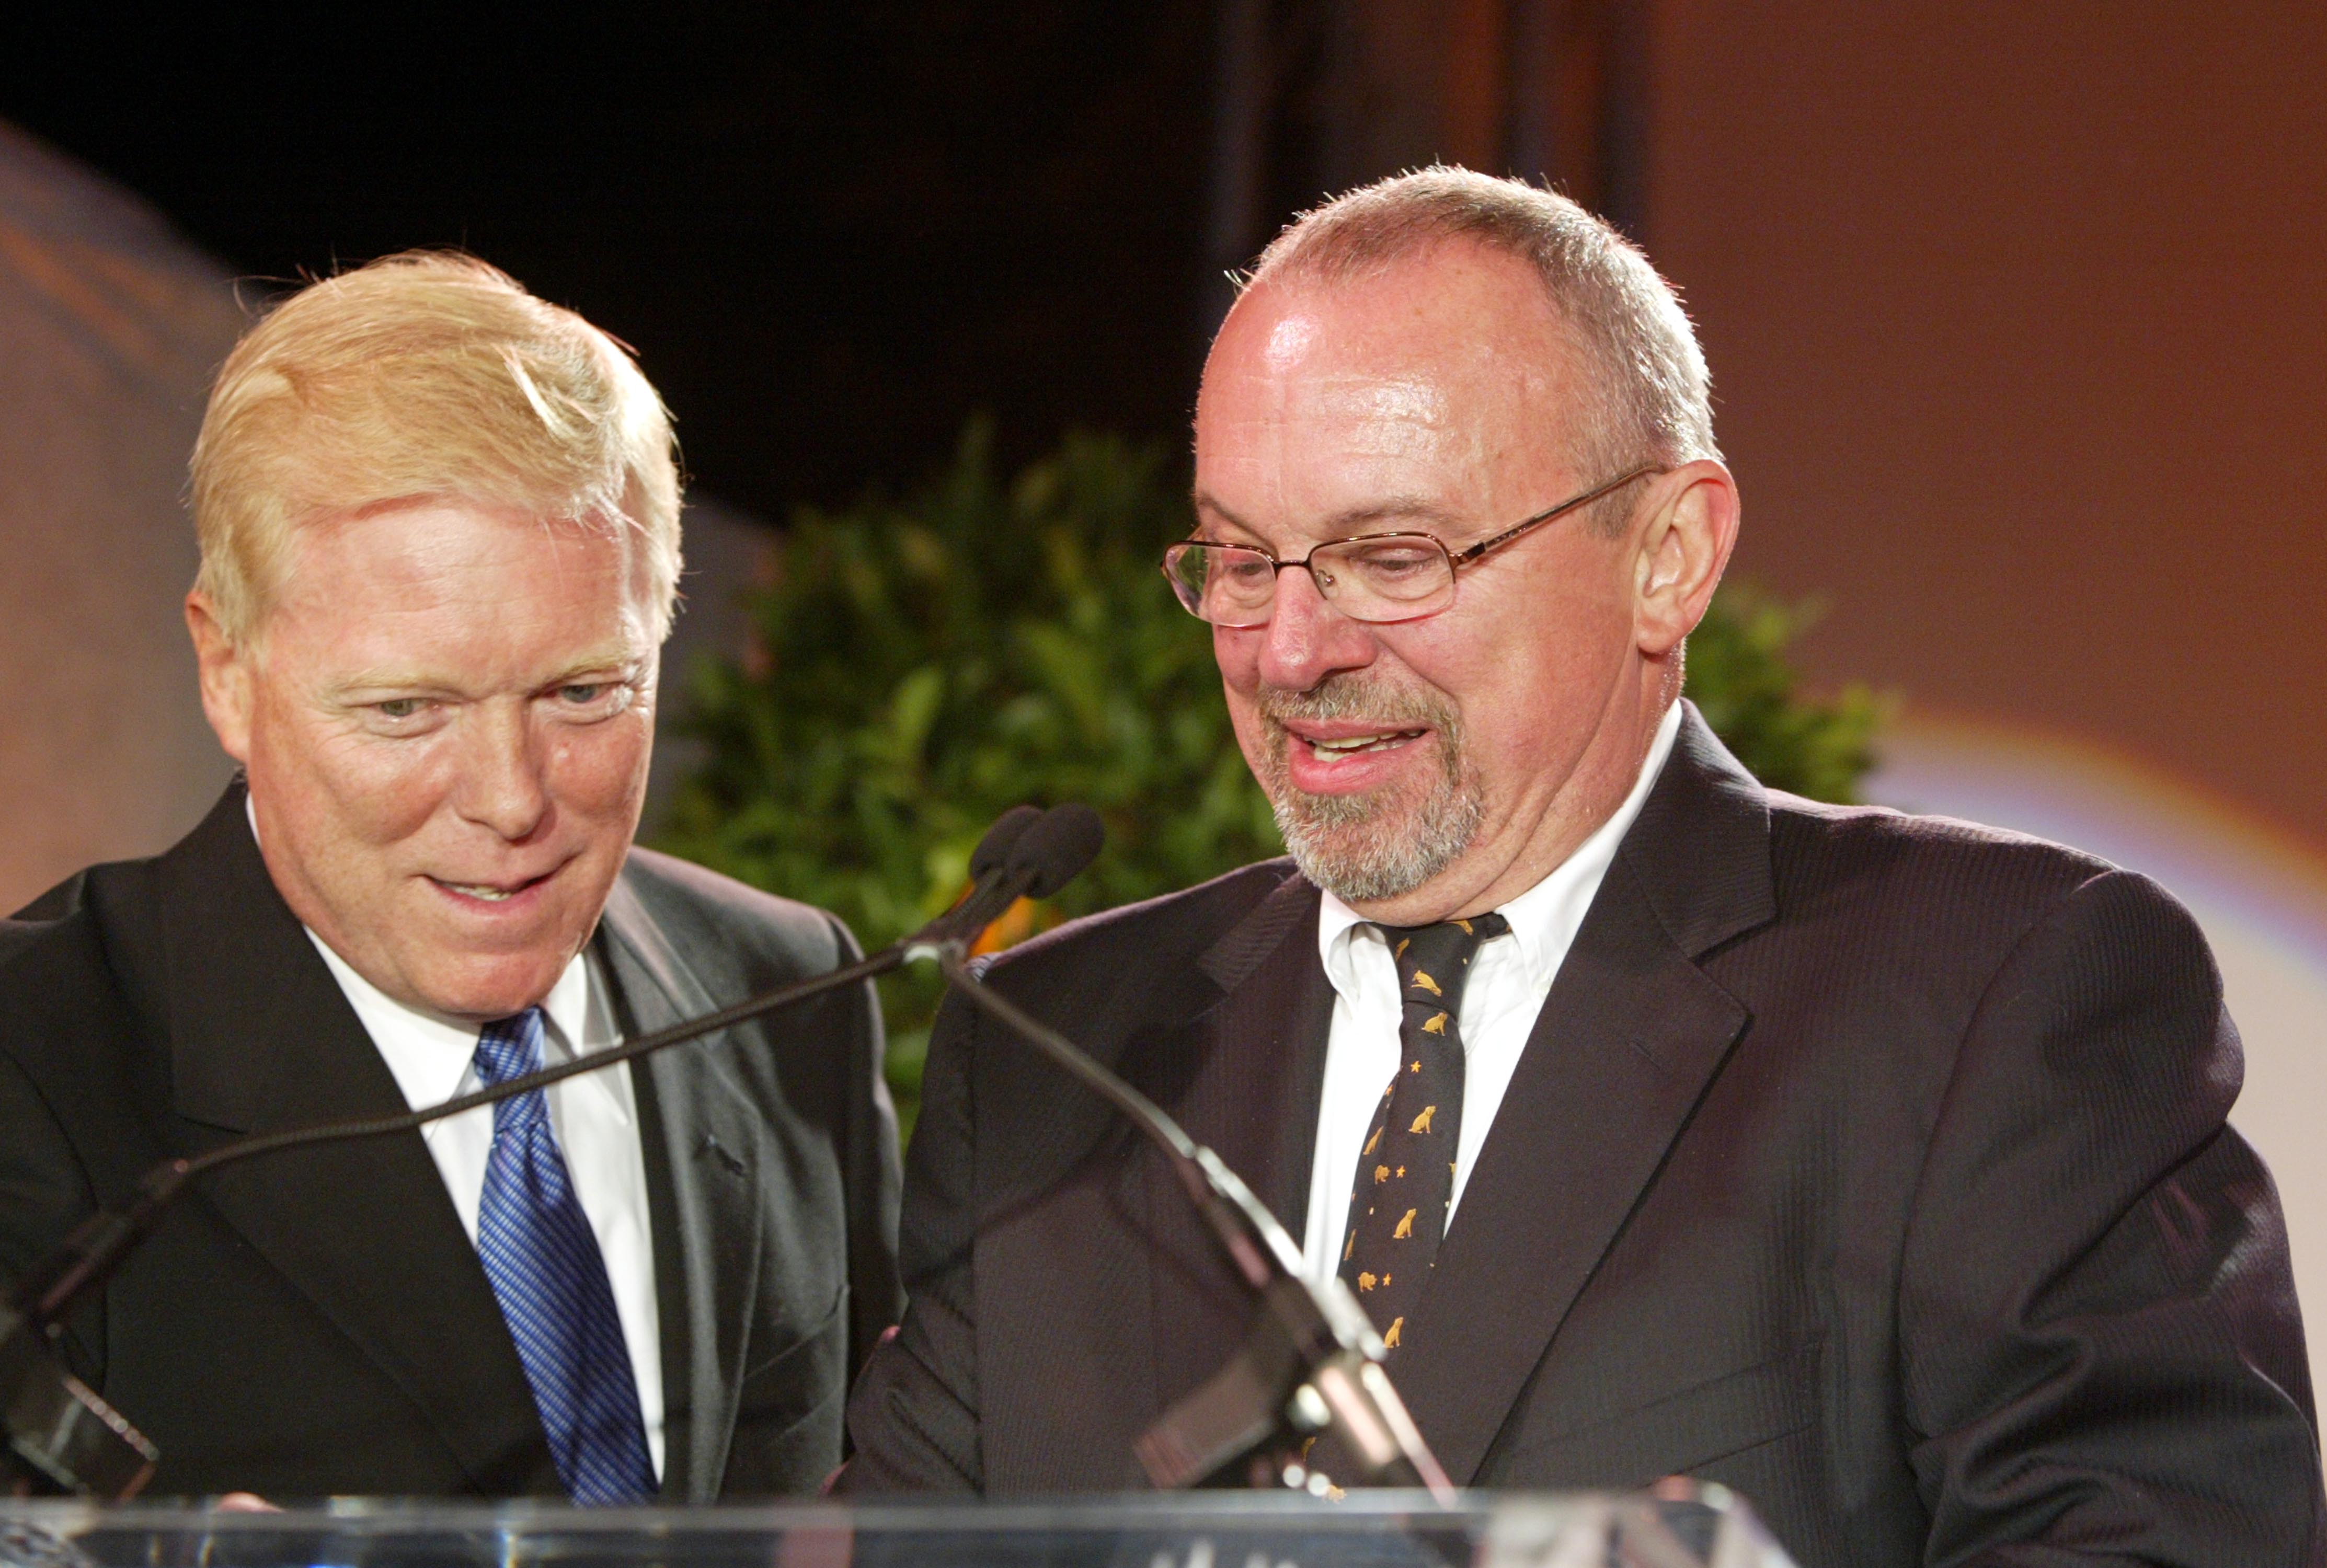 Congressman Richard Gephardt (L) with Blake Byrne on stage at Project Angel Food's 11th Annual Angel Awards Gala held at Project Angel Food Headquarters. Photo: Getty Images/GlobalImagesUkraine